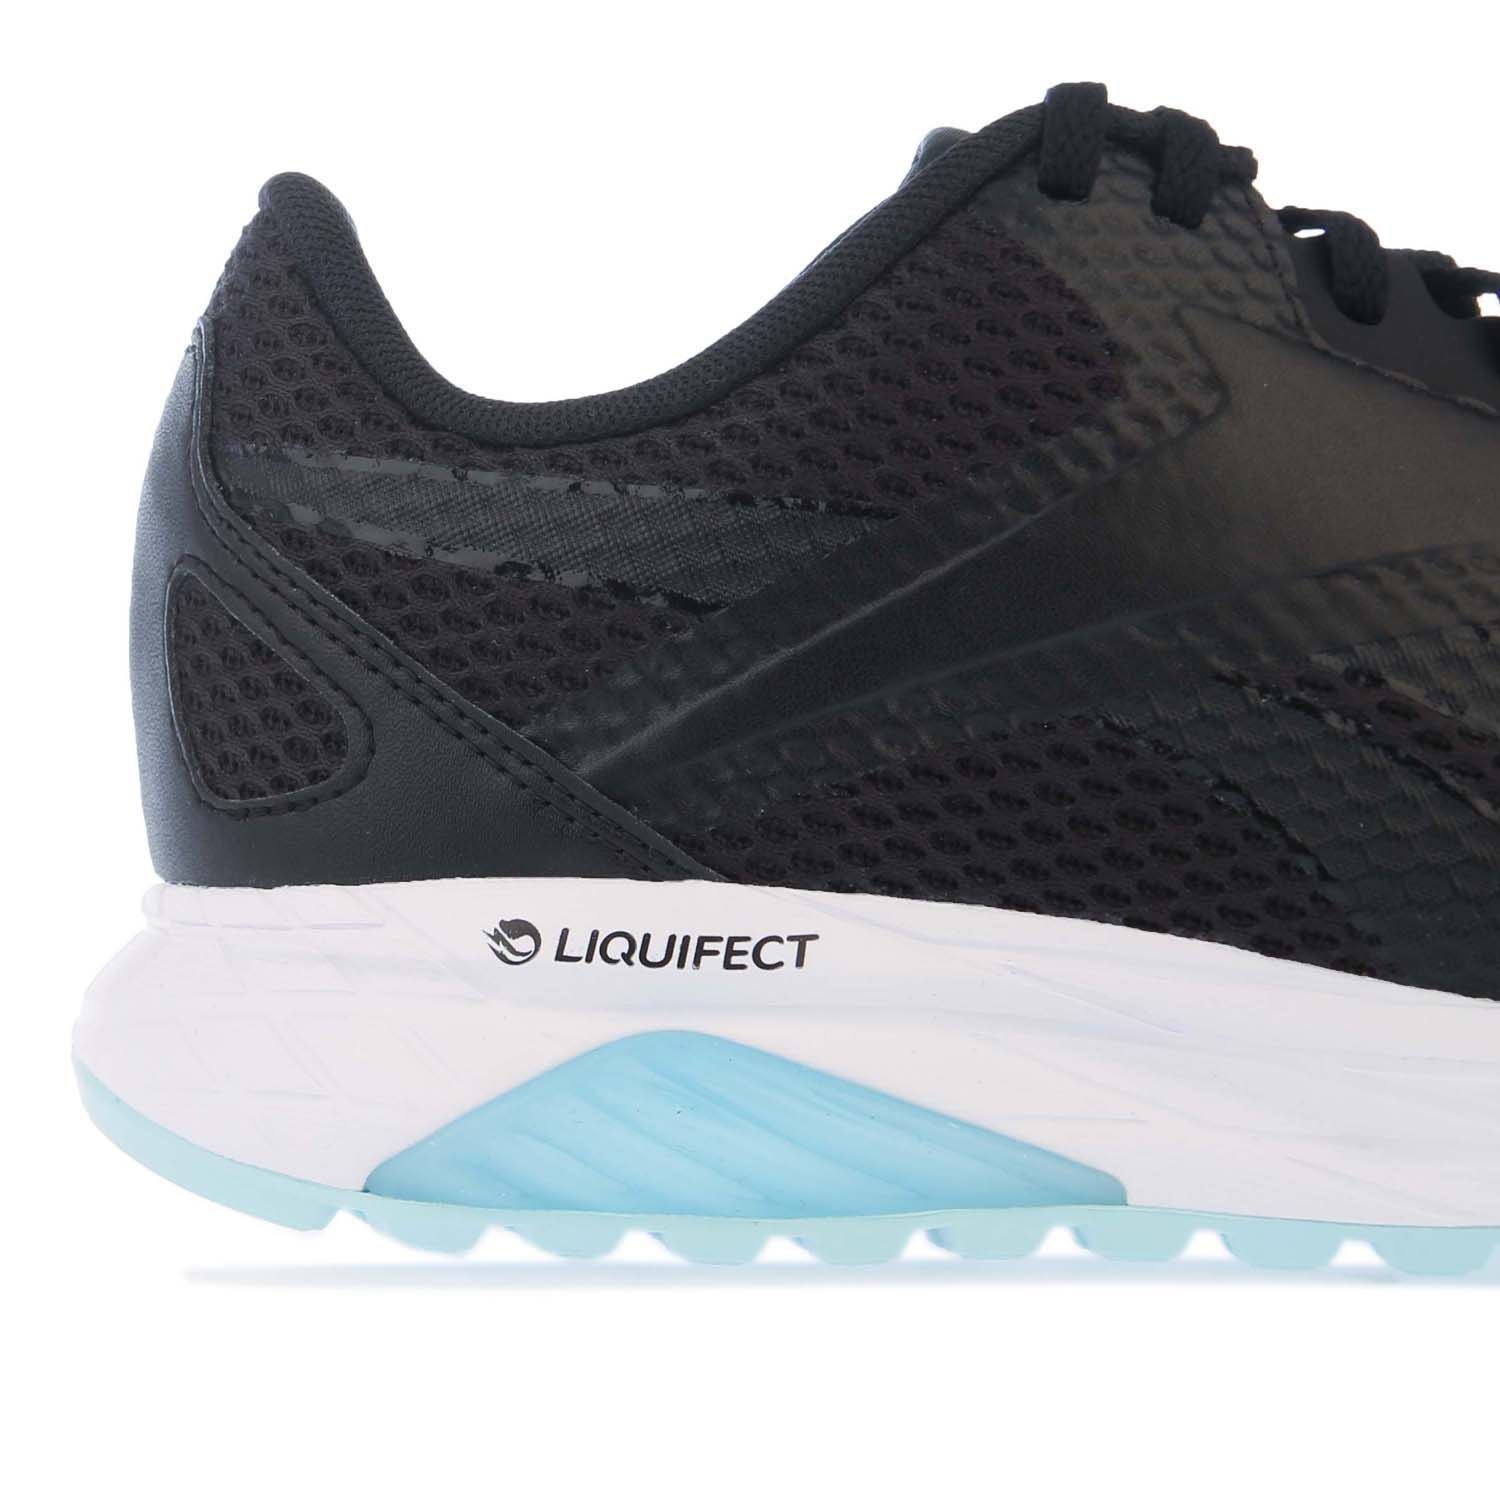 Womens Reebok Liquifect 90 Running Shoes in black - white.- Textile and synthetic upper.- Lace up closure.- Soft  breathable feel. - FuelFoam midsole. - Durable rubber outsole.- Textile and synthetic upper  Textile lining  Synthetic sole.- Ref: FX1690